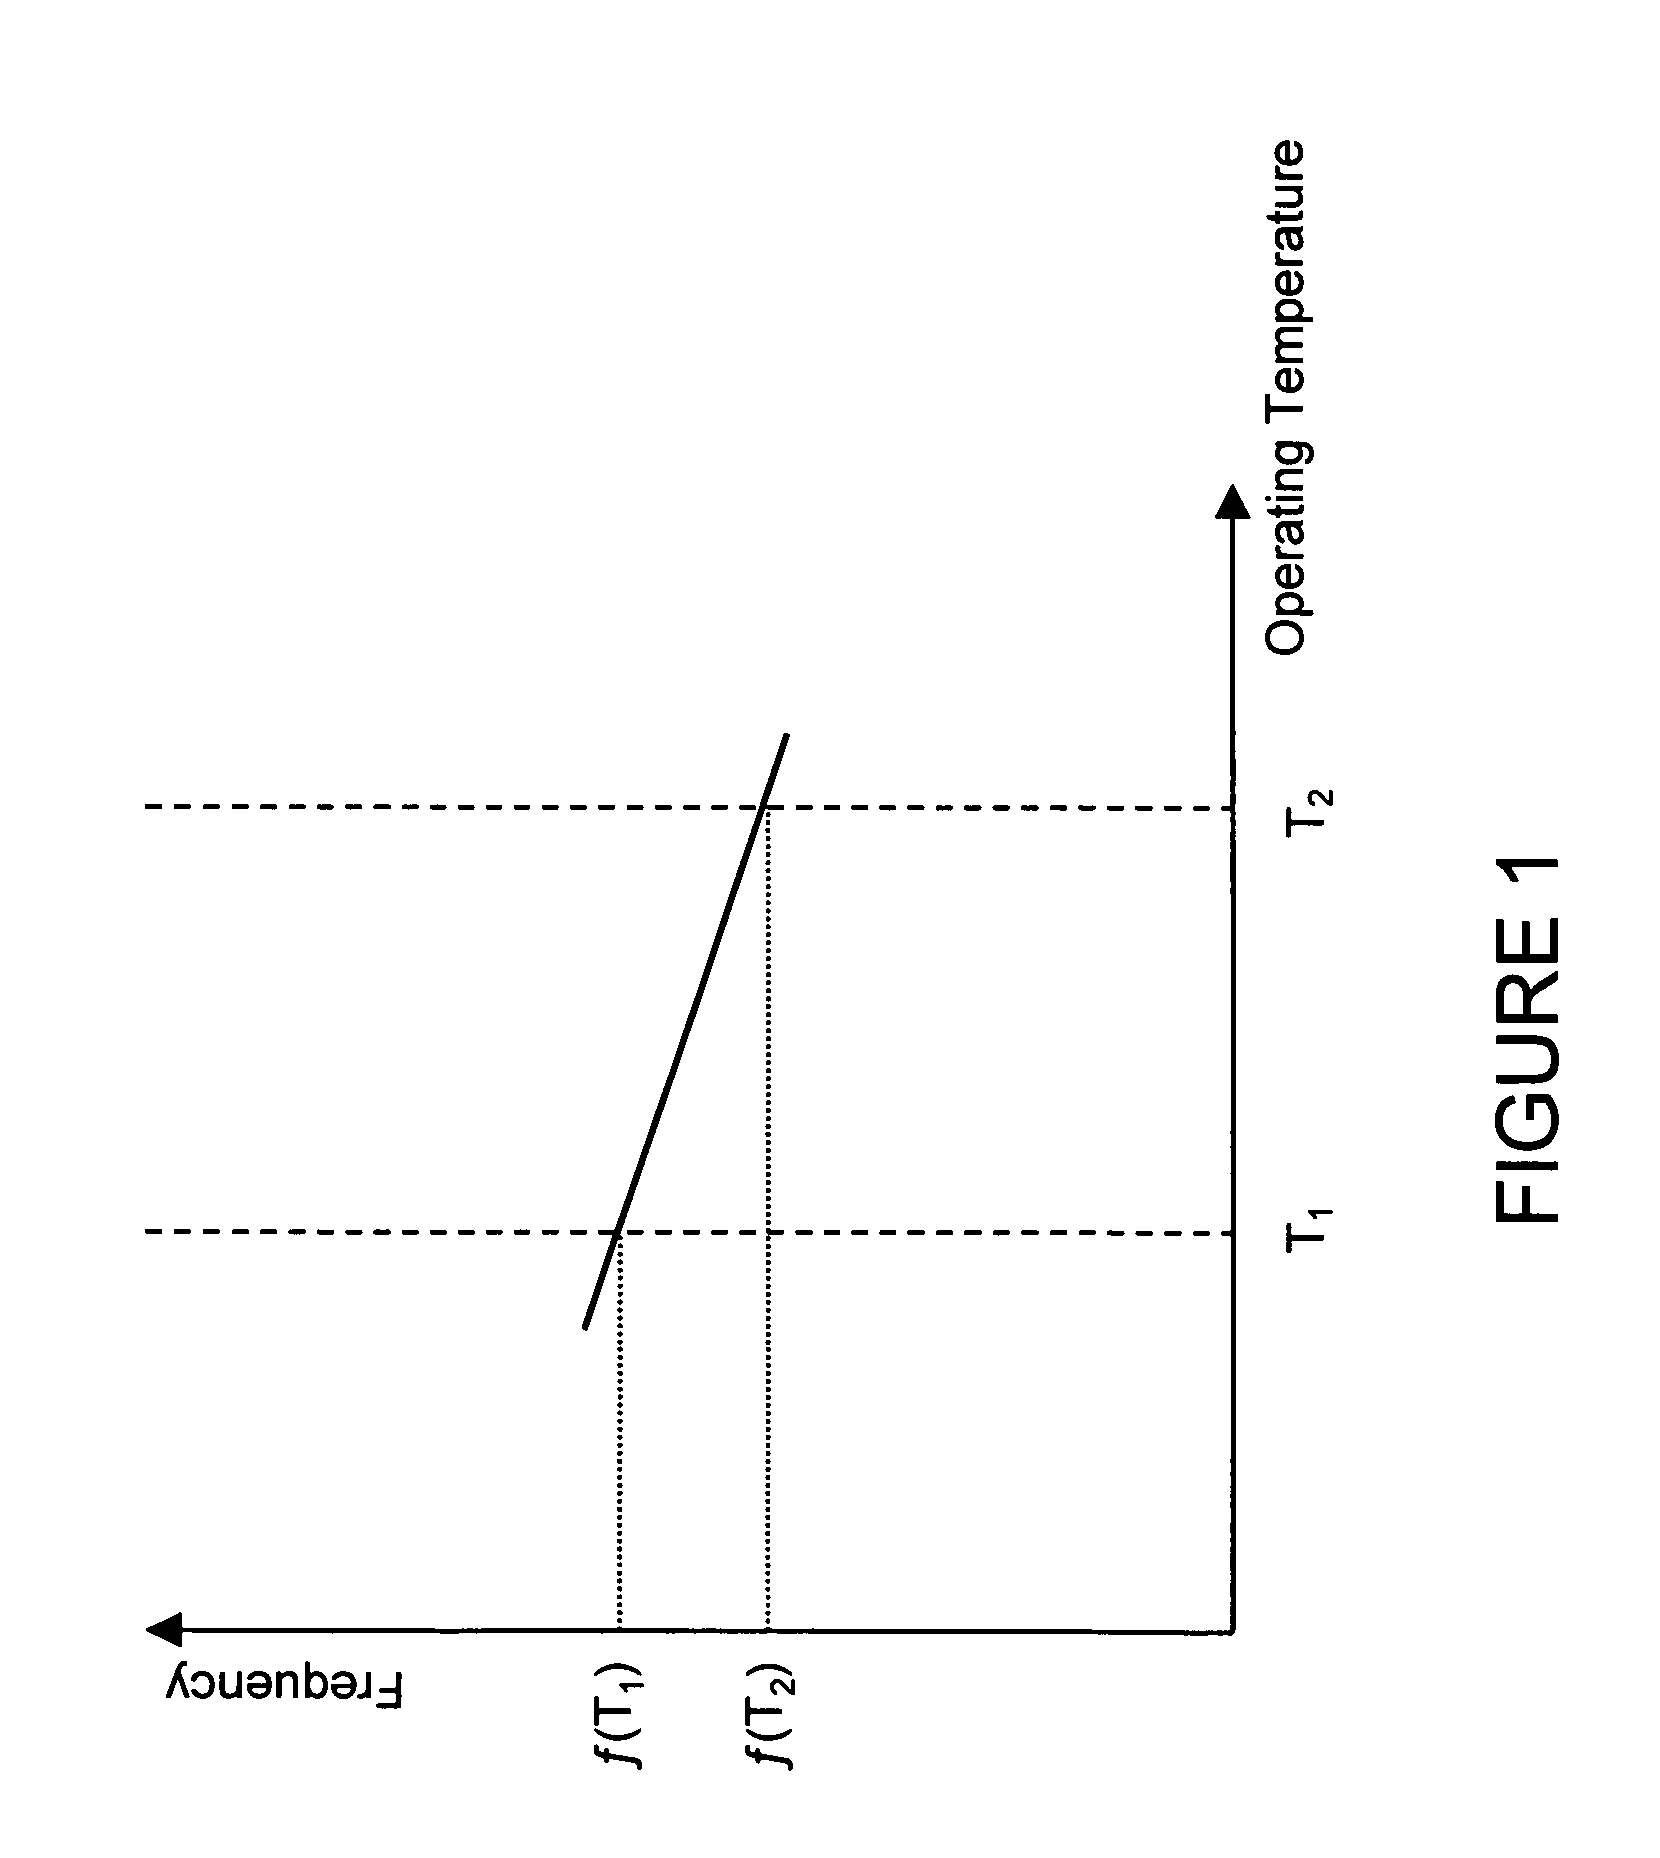 Oscillator system having a plurality of microelectromechanical resonators and method of designing, controlling or operating the same